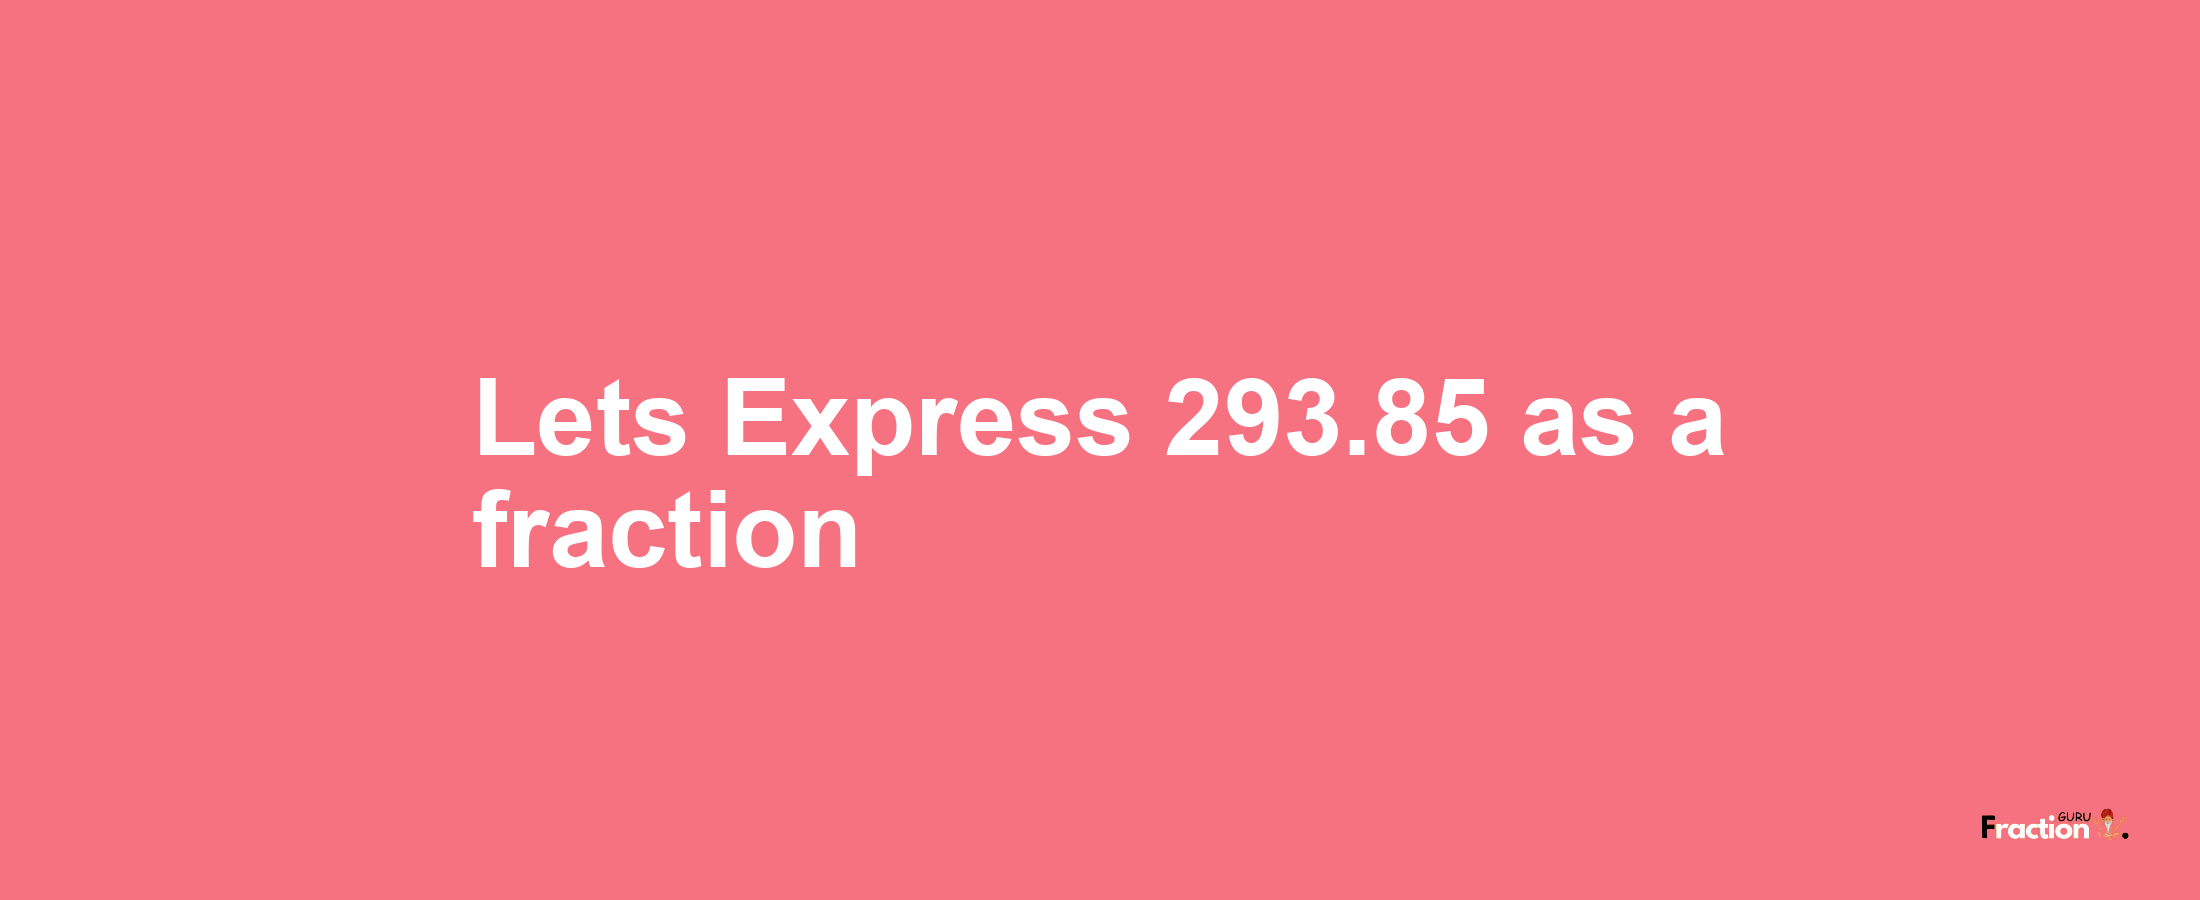 Lets Express 293.85 as afraction